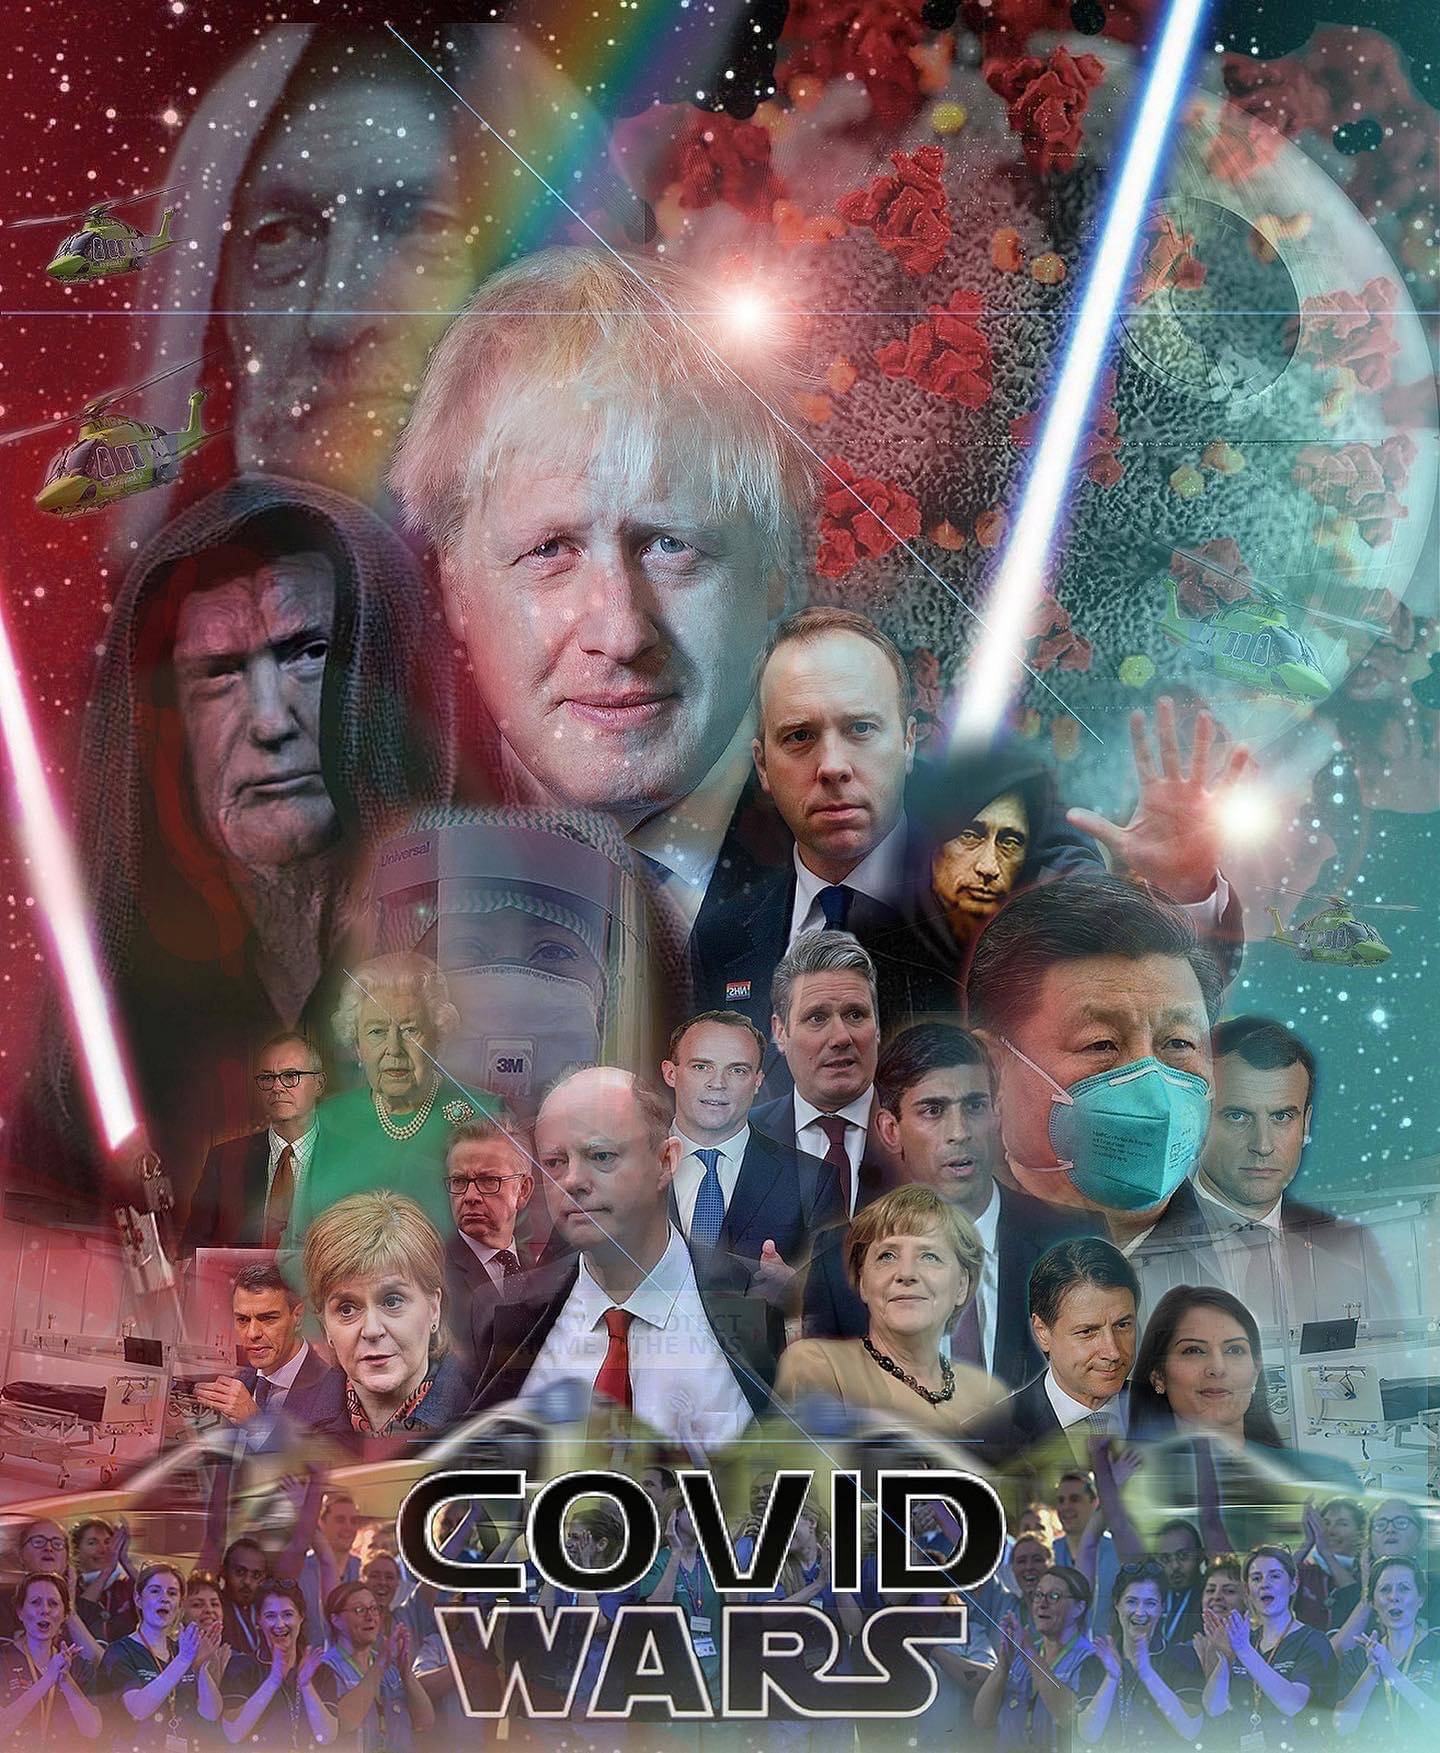 "Covid Wars" - A photoshop take on the Coronavirus Pandemic using the Star Wars movie poster design as inspiration